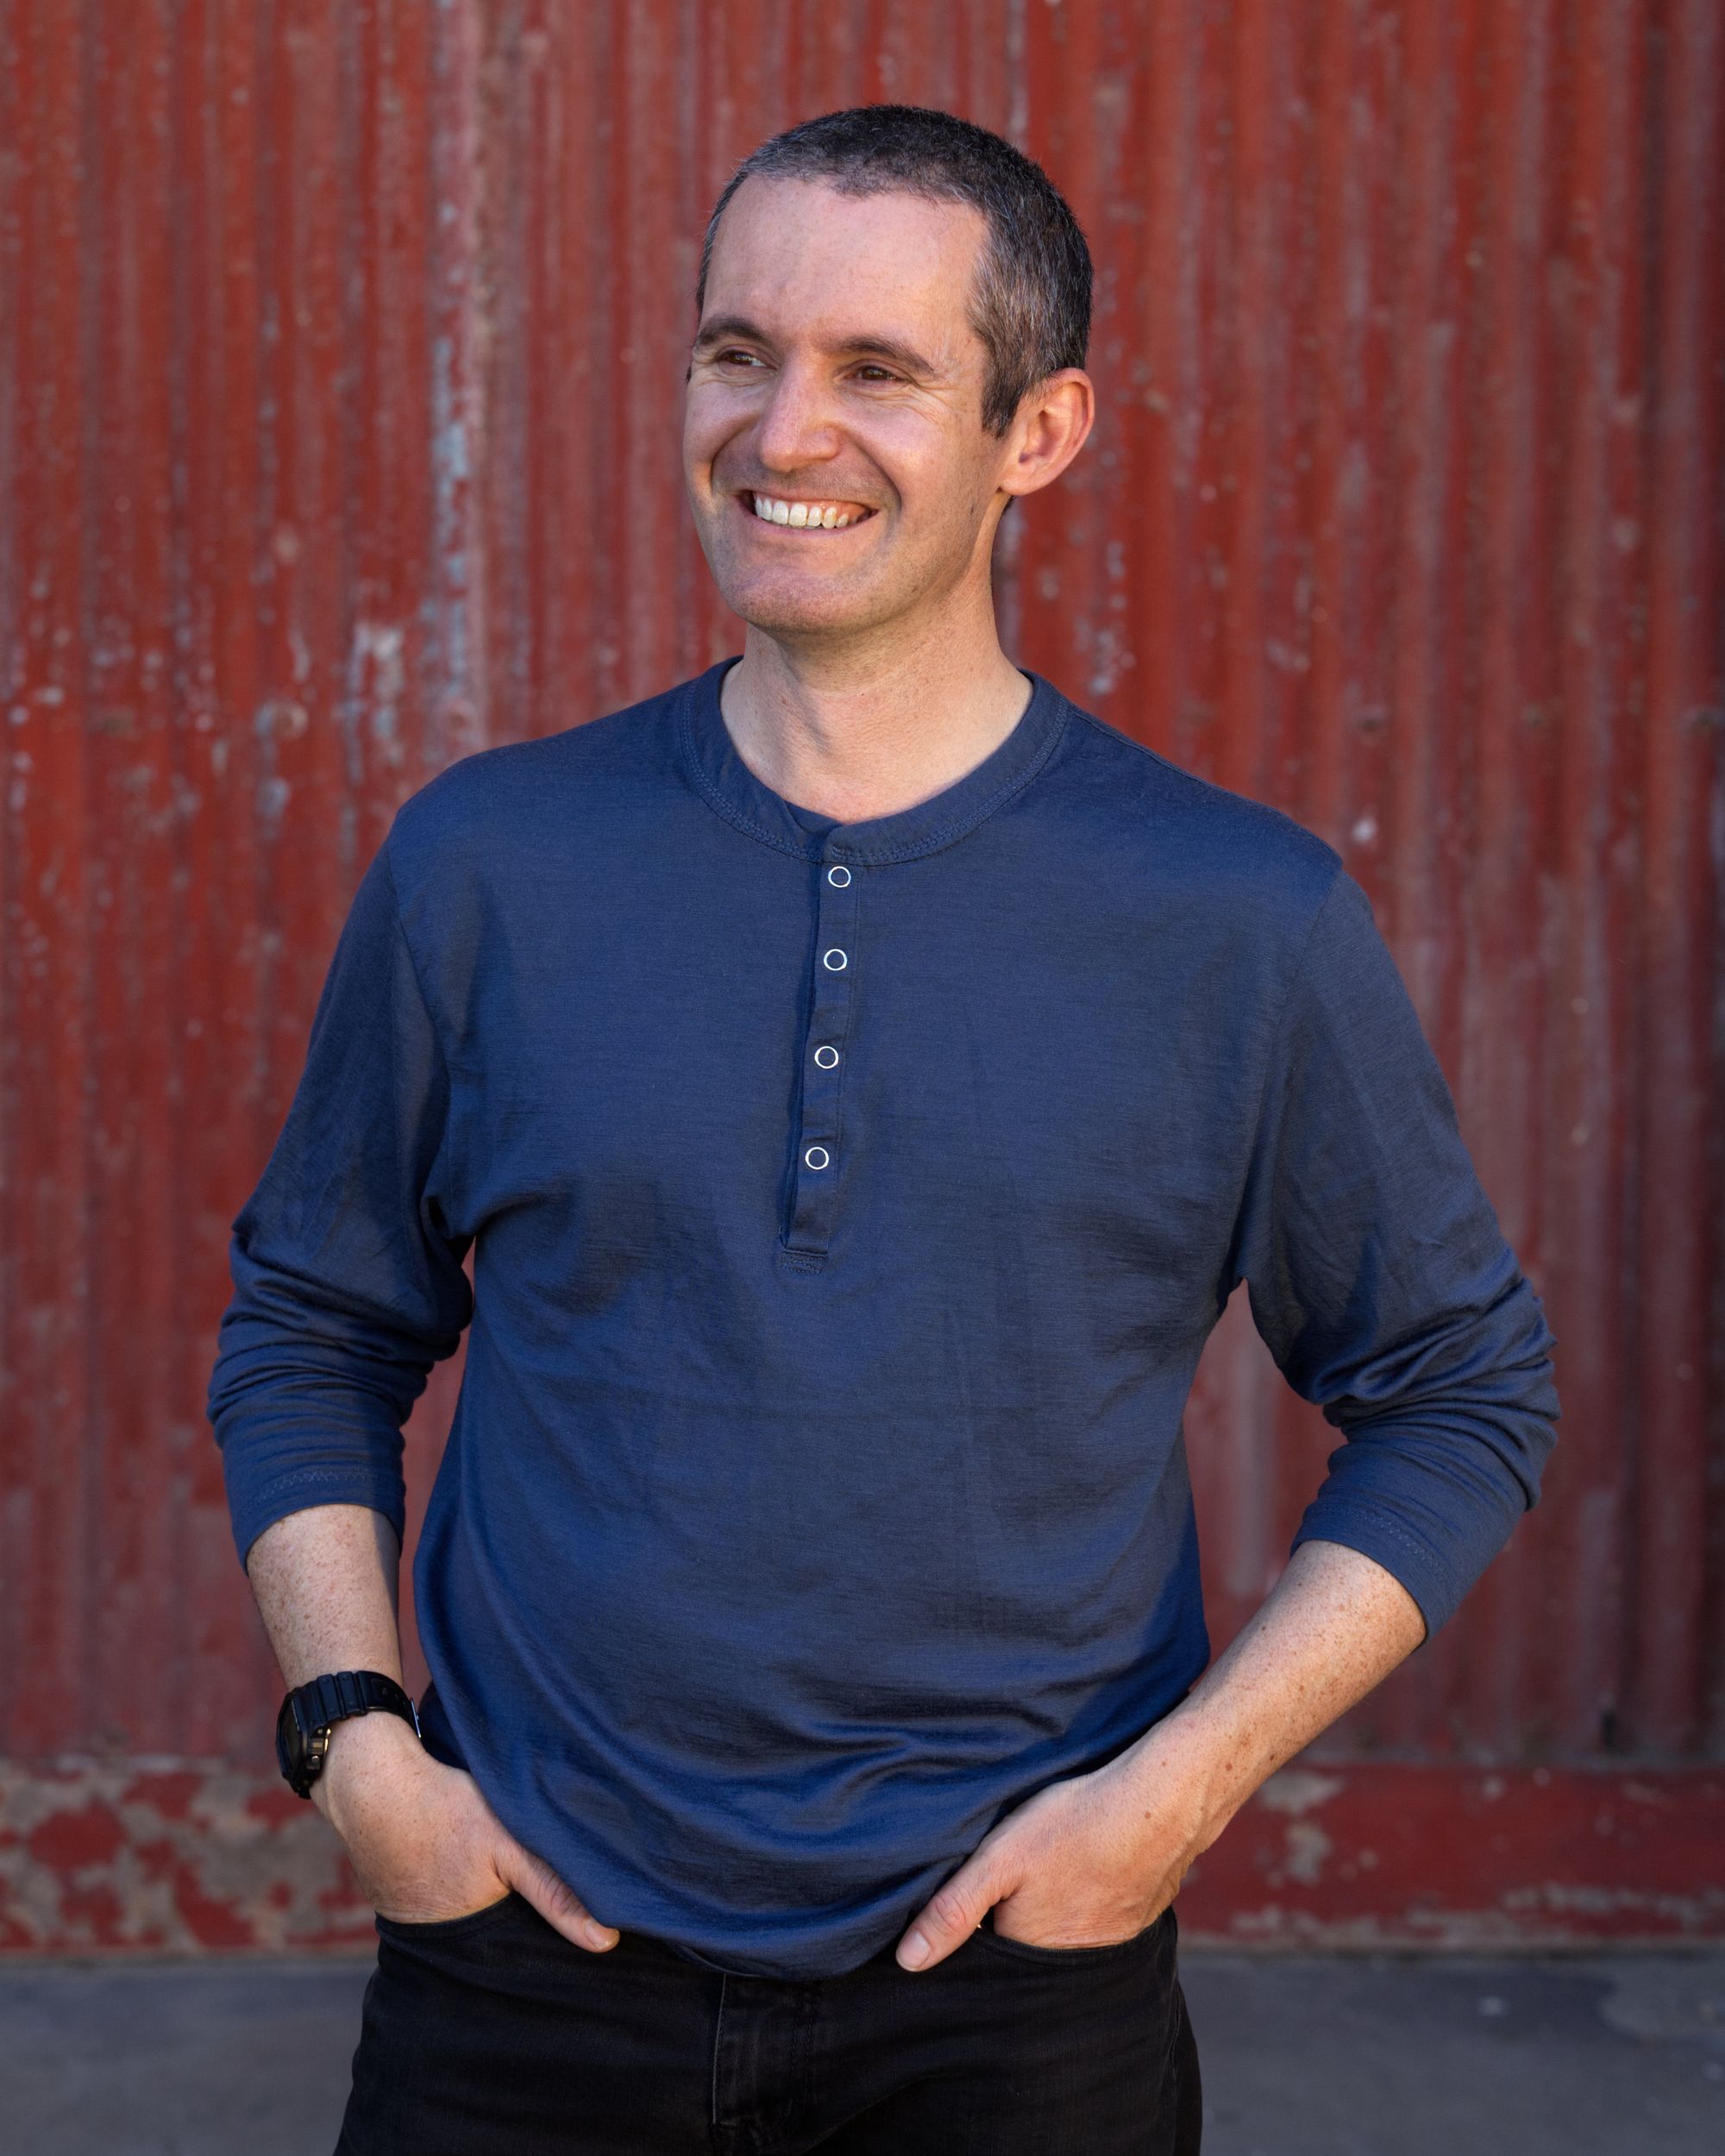 A man in a blue long sleeve tee stands with his hands in his pockets (thumbs out) in front of a red corrugated iron door.